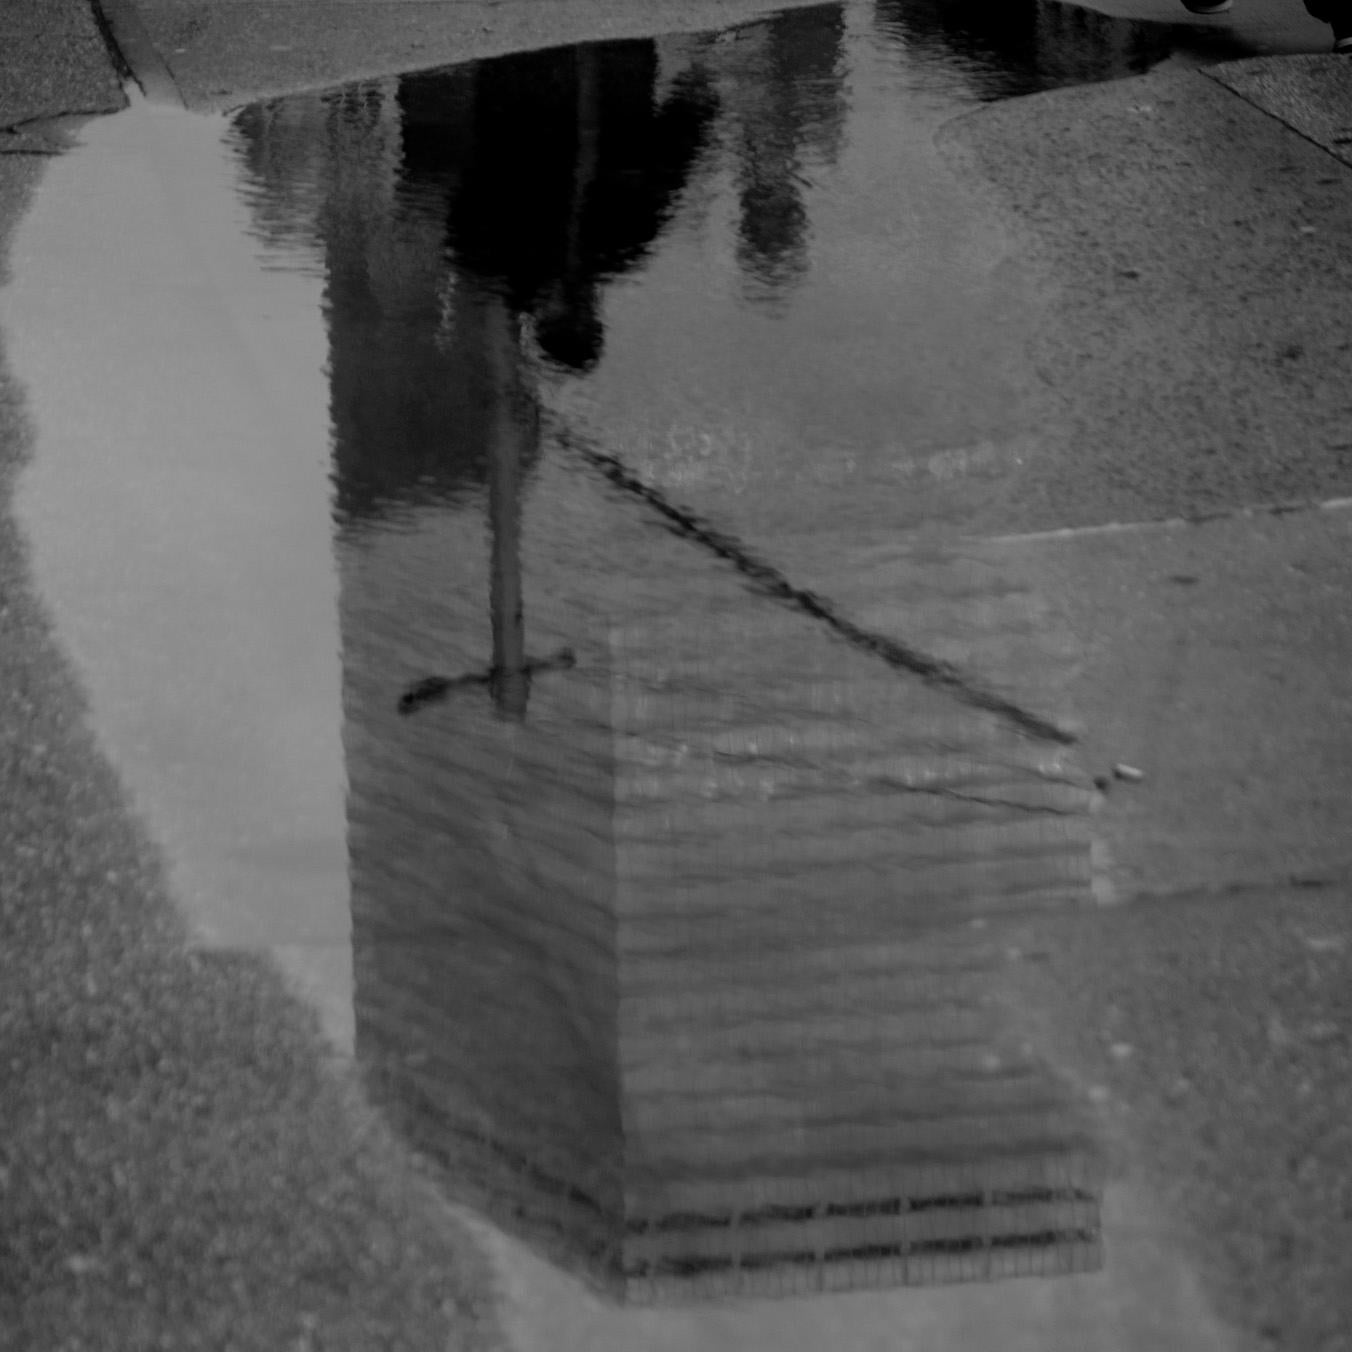 Carlo Bevilacqua Landscape Photograph - NYC Reflection (from New York series )